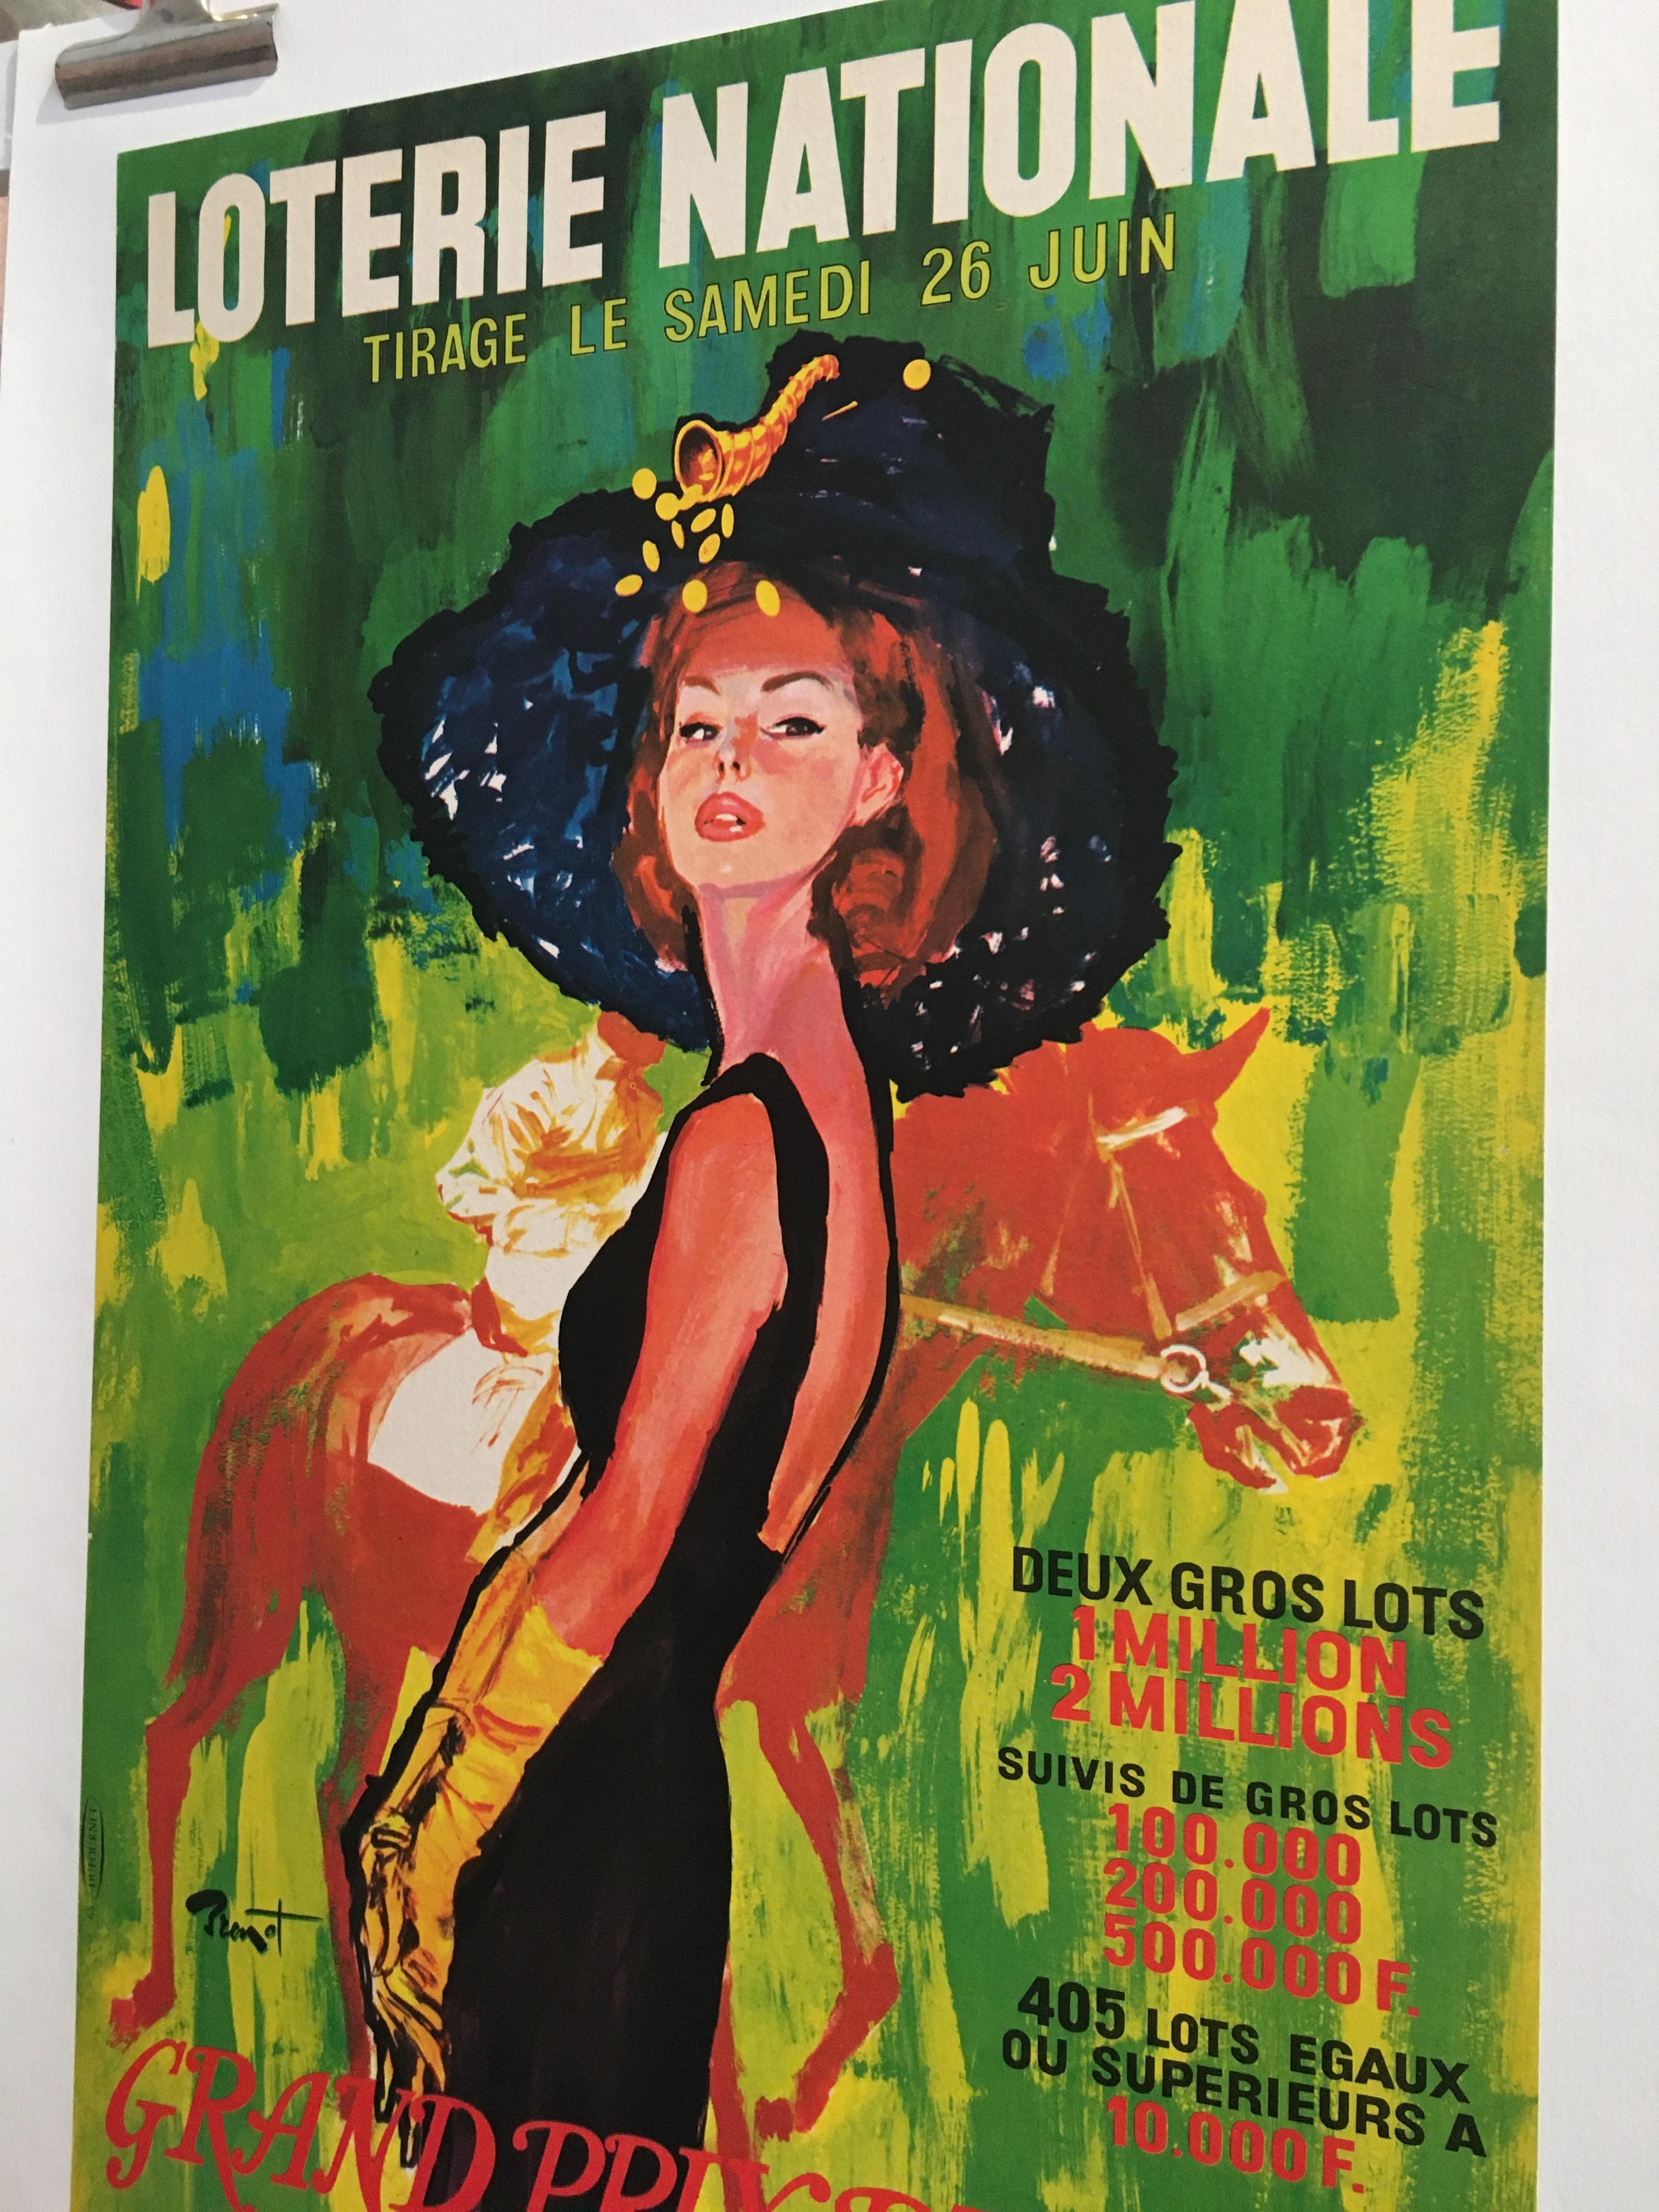 'Loterie Nationale' Original Vintage French Lithograph Poster, by Brenot, 1965 For Sale 1